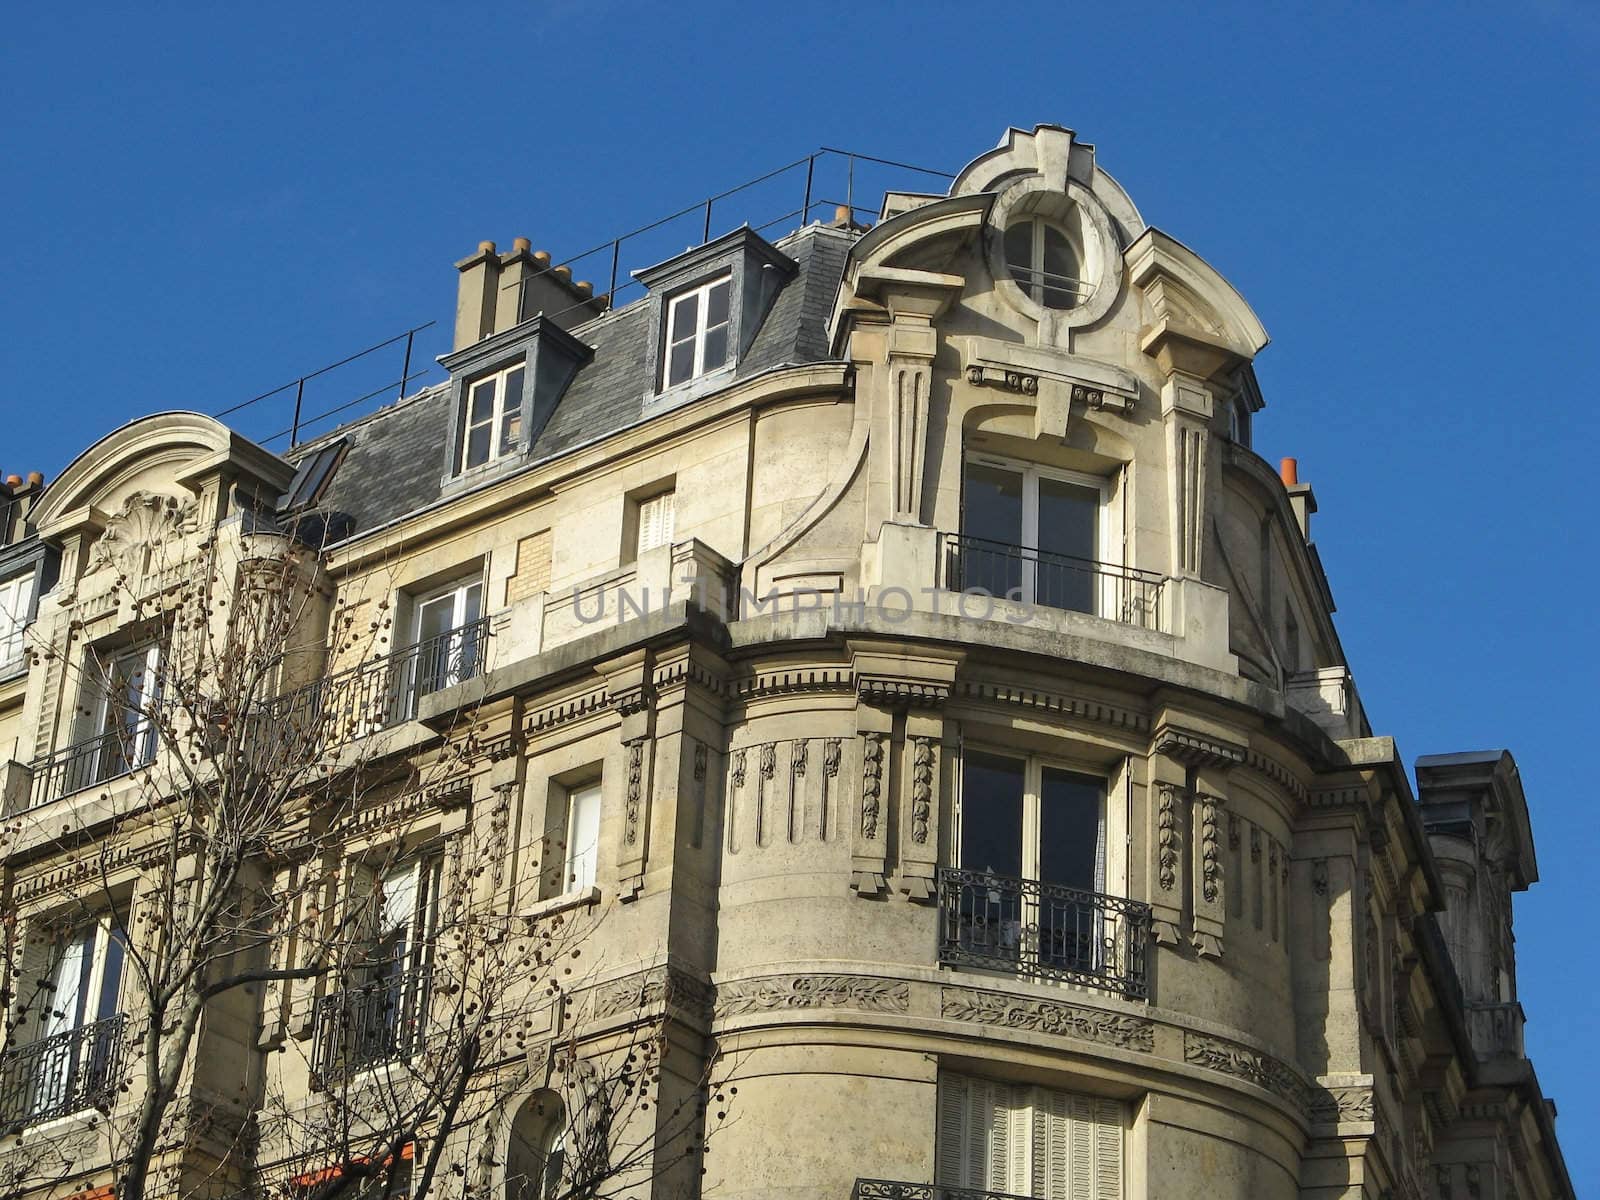 view of an ancient building on the grand parisian boulevards